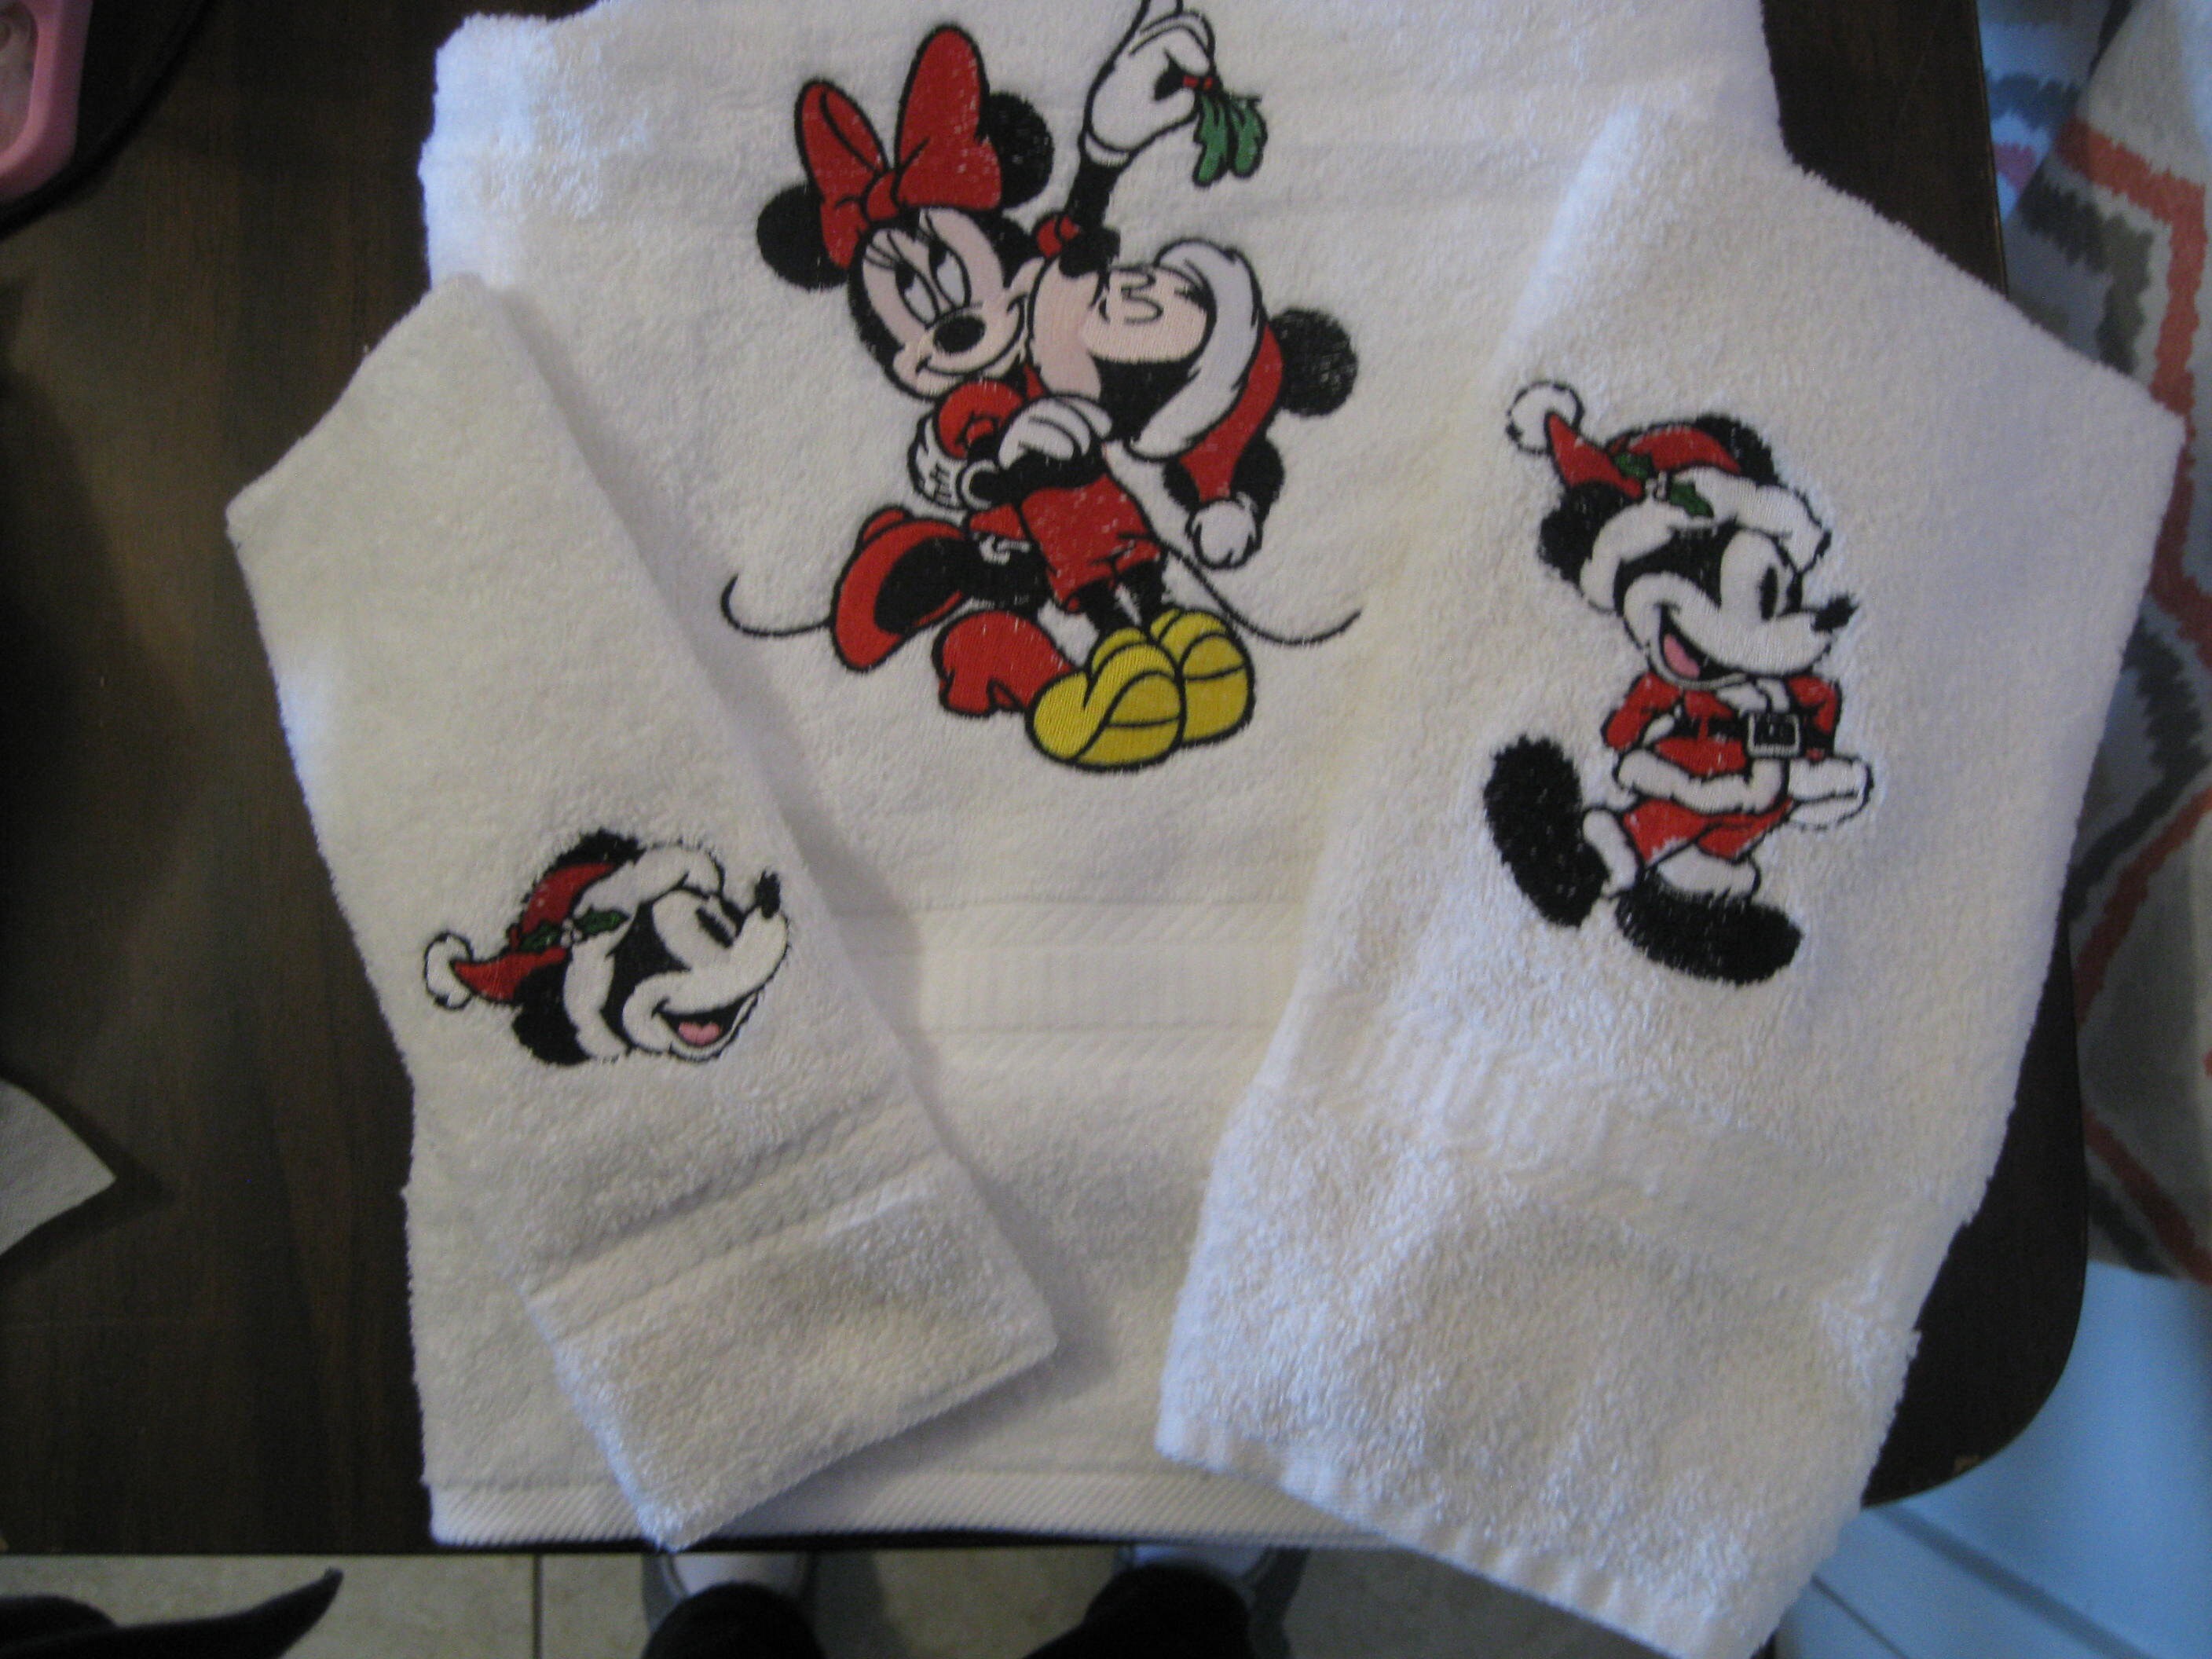 Disney Bath | Disney Mickey & Minnie Mouse Christmas Hand Towels 2 Pack | Color: Red/White | Size: Os | Welovedisney4's Closet